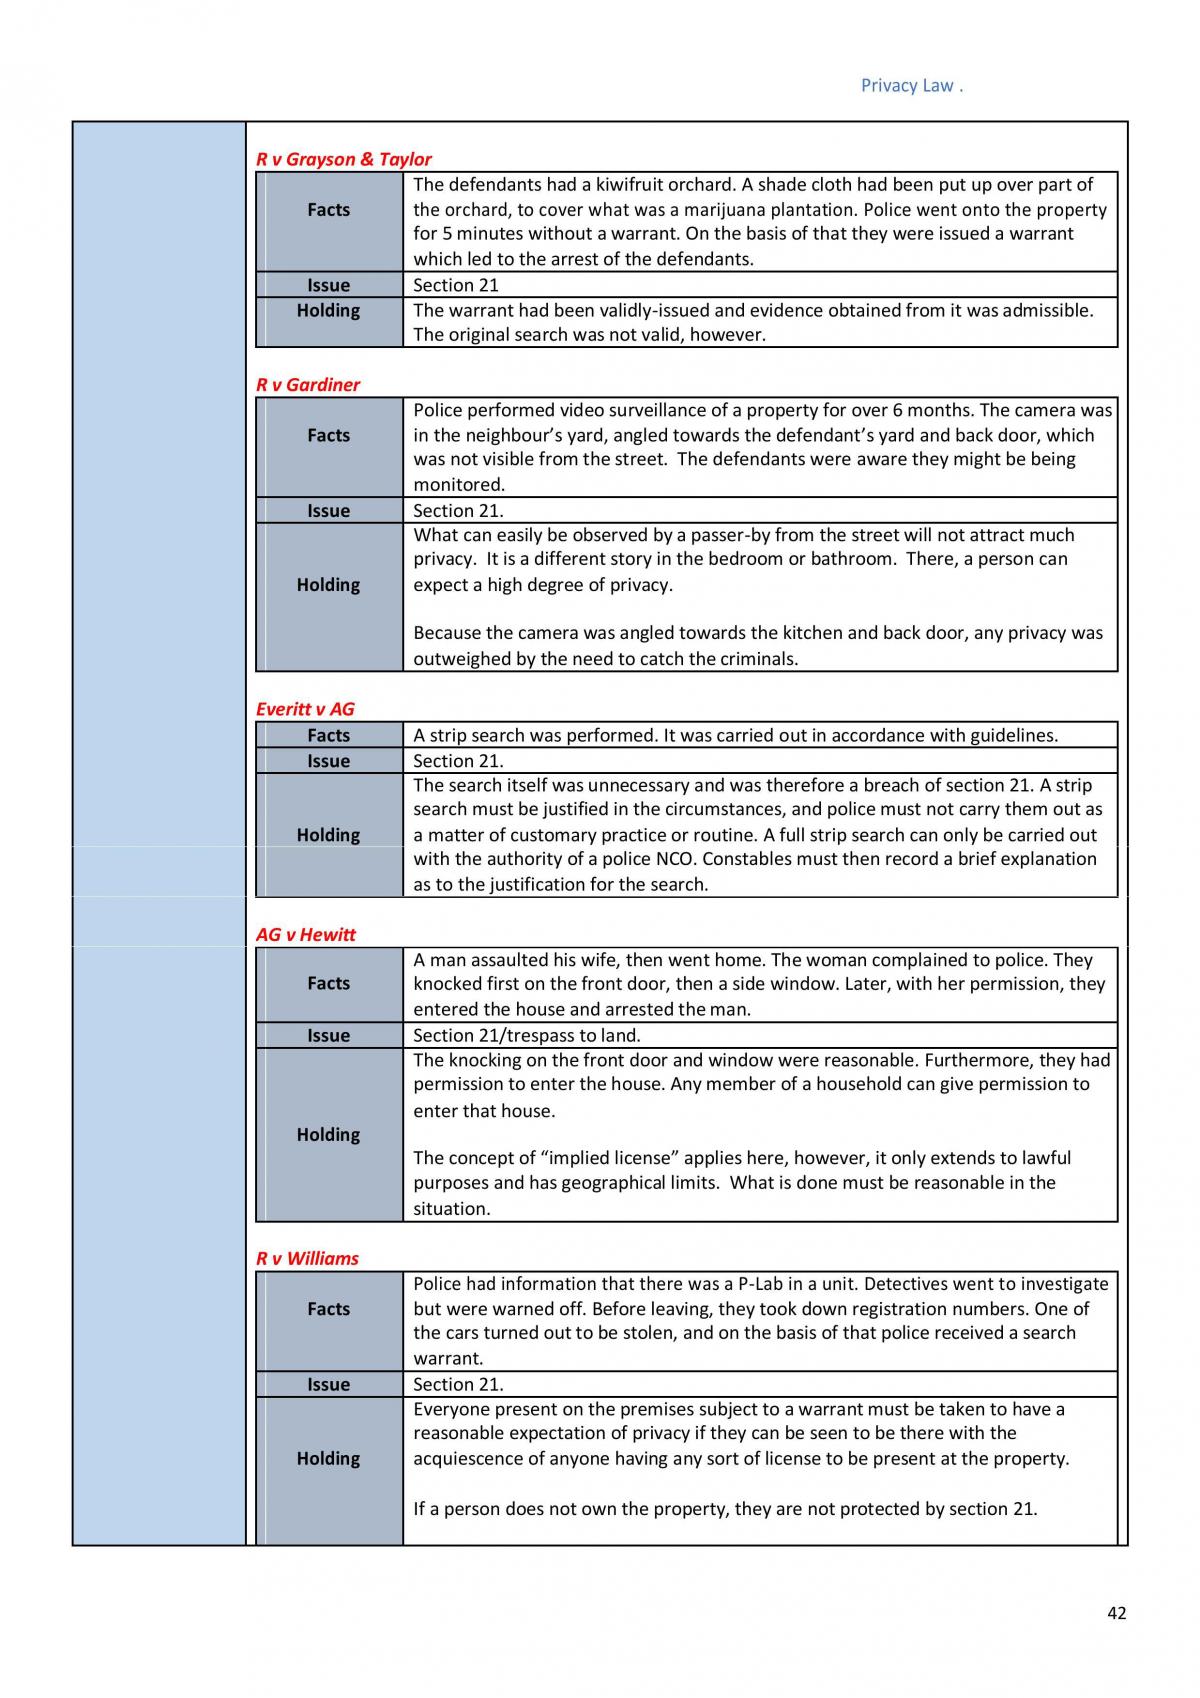 Privacy Law full subject notes - Page 42